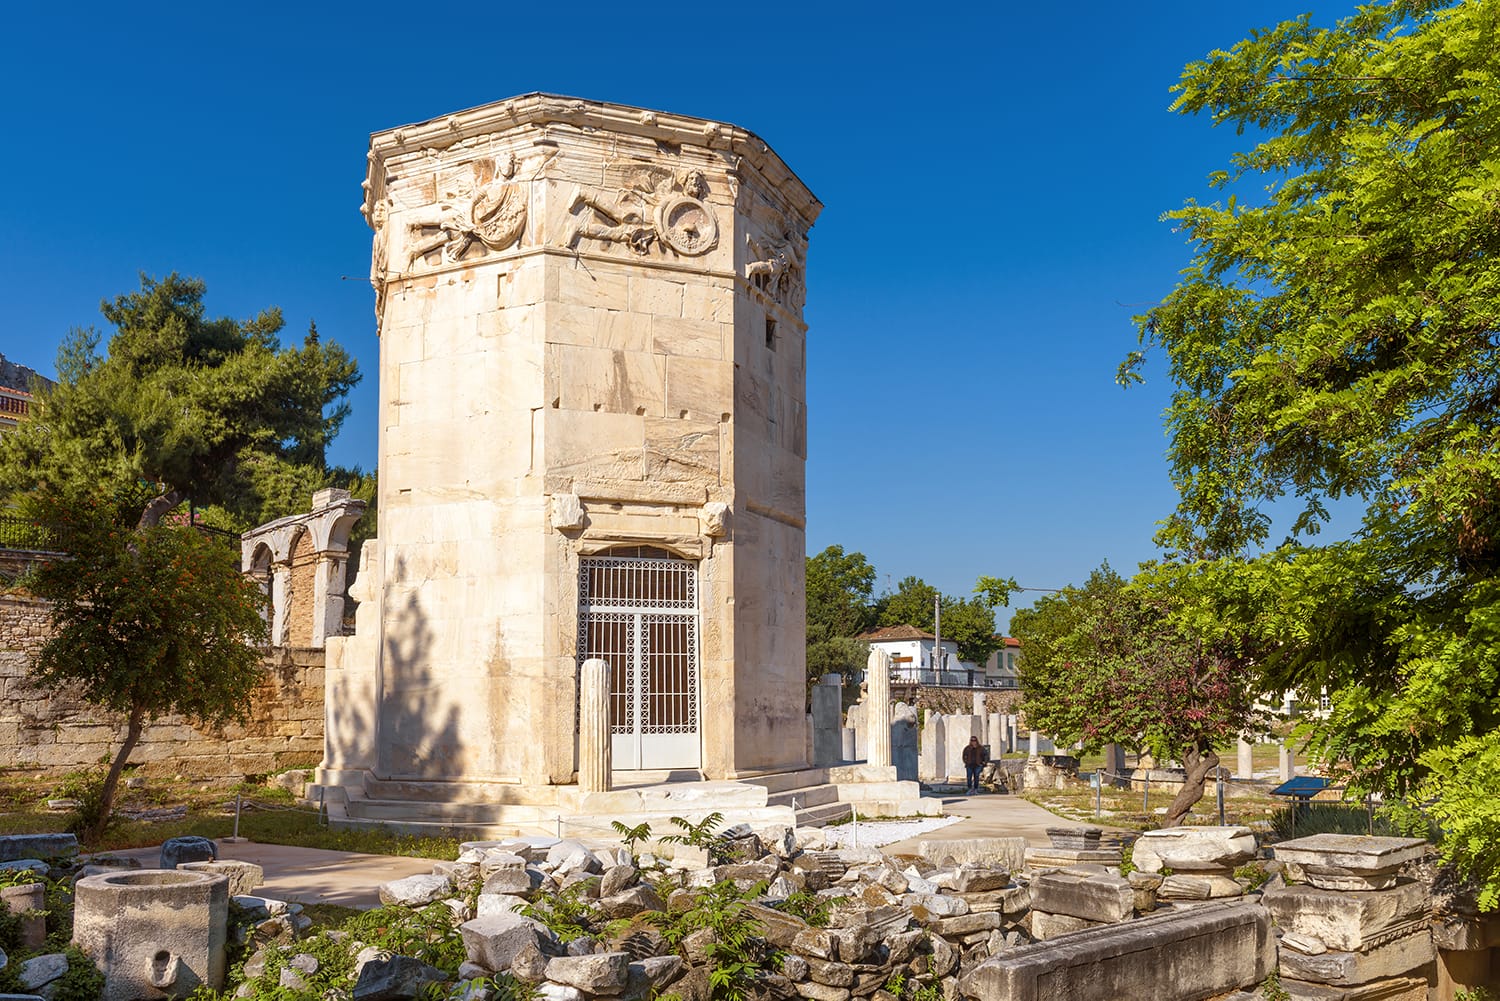 Tower of Winds or Aerides on Roman Agora, Athens, Greece. It is one of the main landmarks of Athens. Scenery of Ancient Greek ruins in Athens centre at Plaka district.